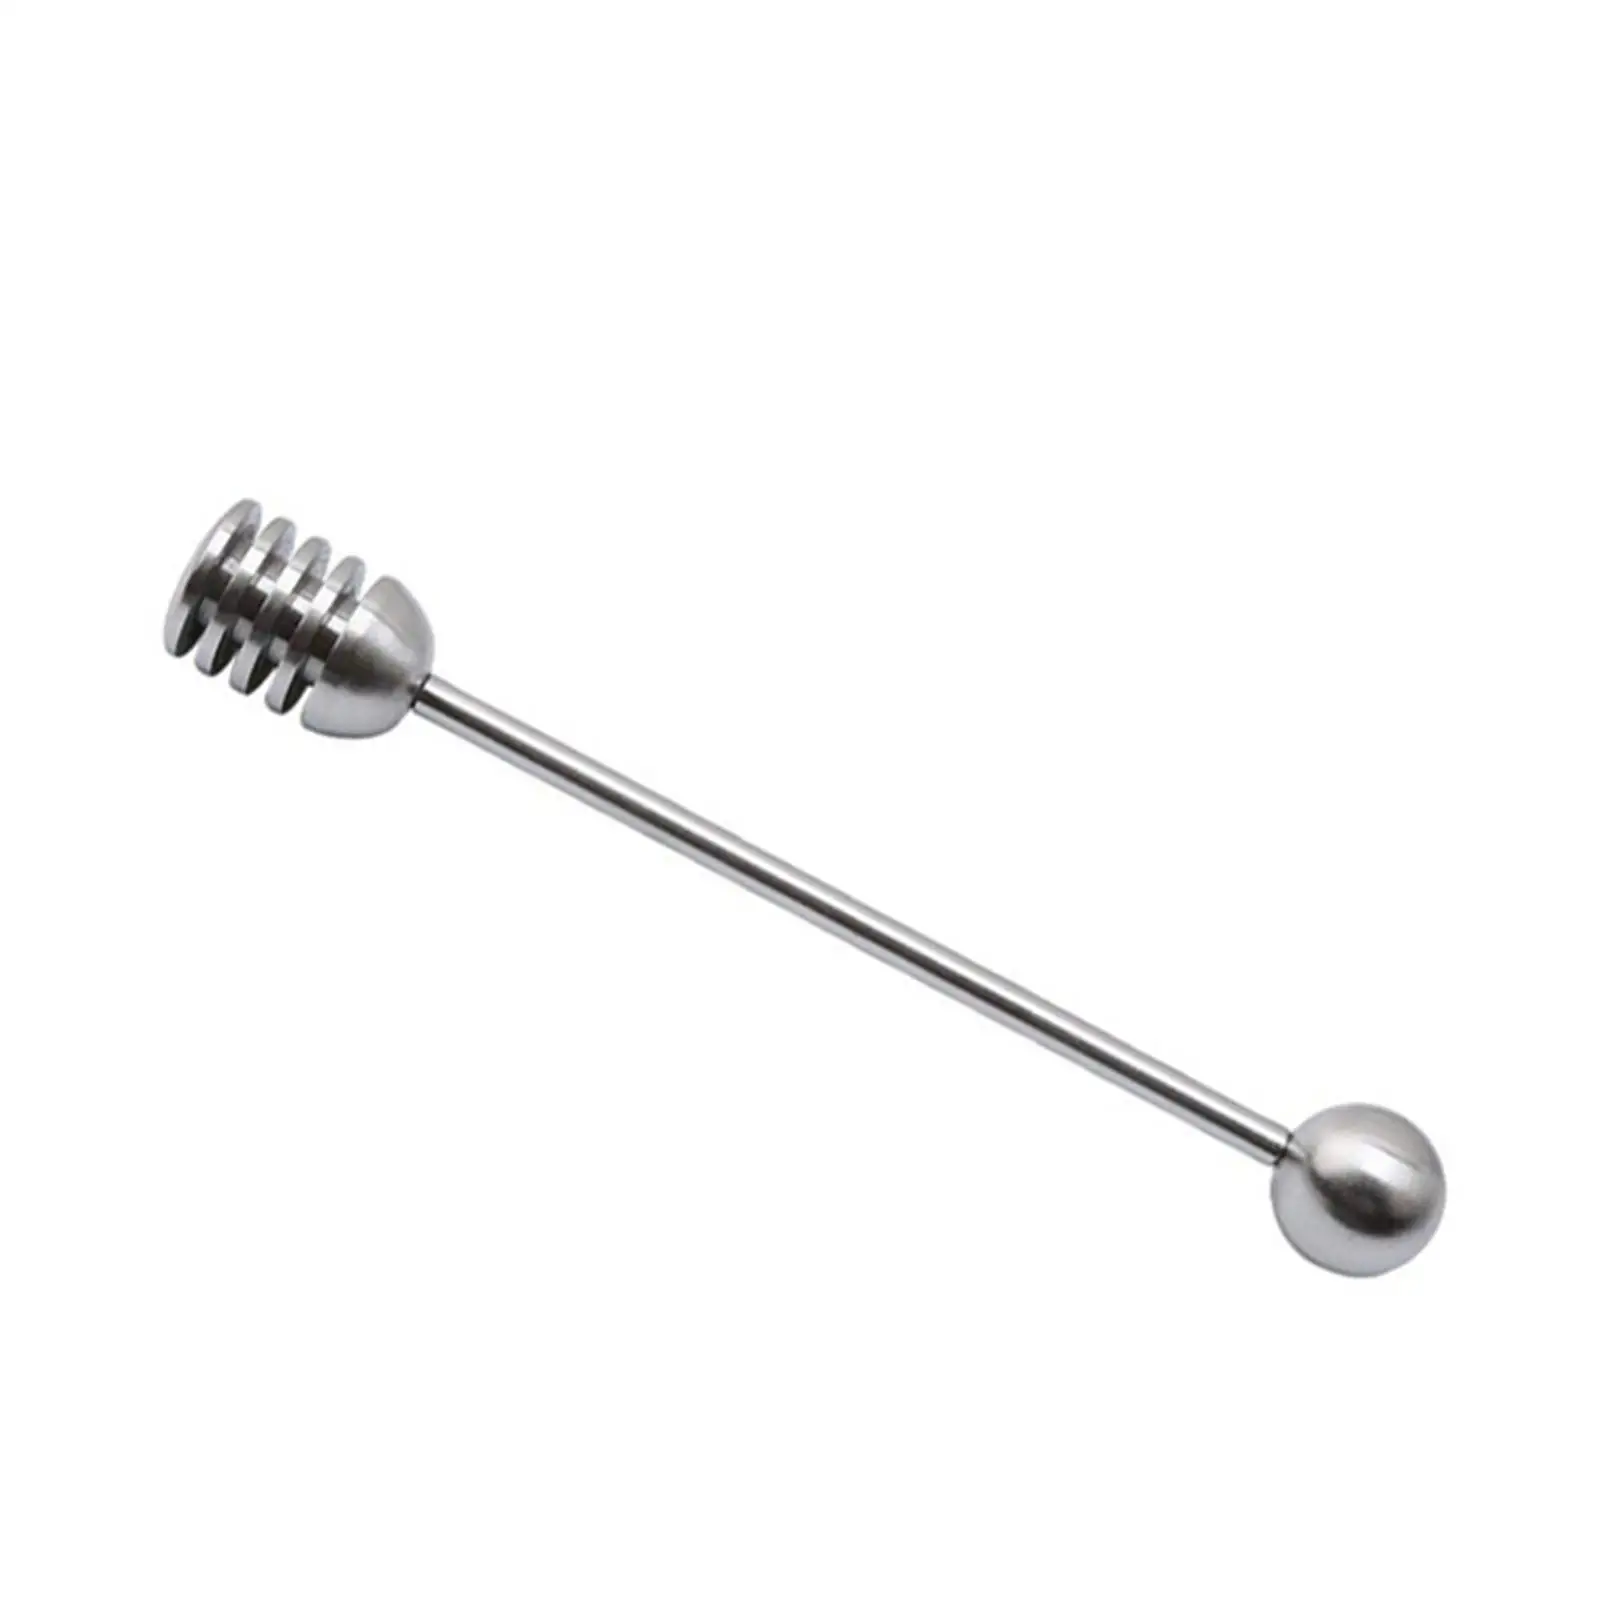 Solid Stainless Steel Honey Dipper Rod Accessories Comfortable Grip Durable Kitchen Utensils Wear Resistant Honey Dipping Tool